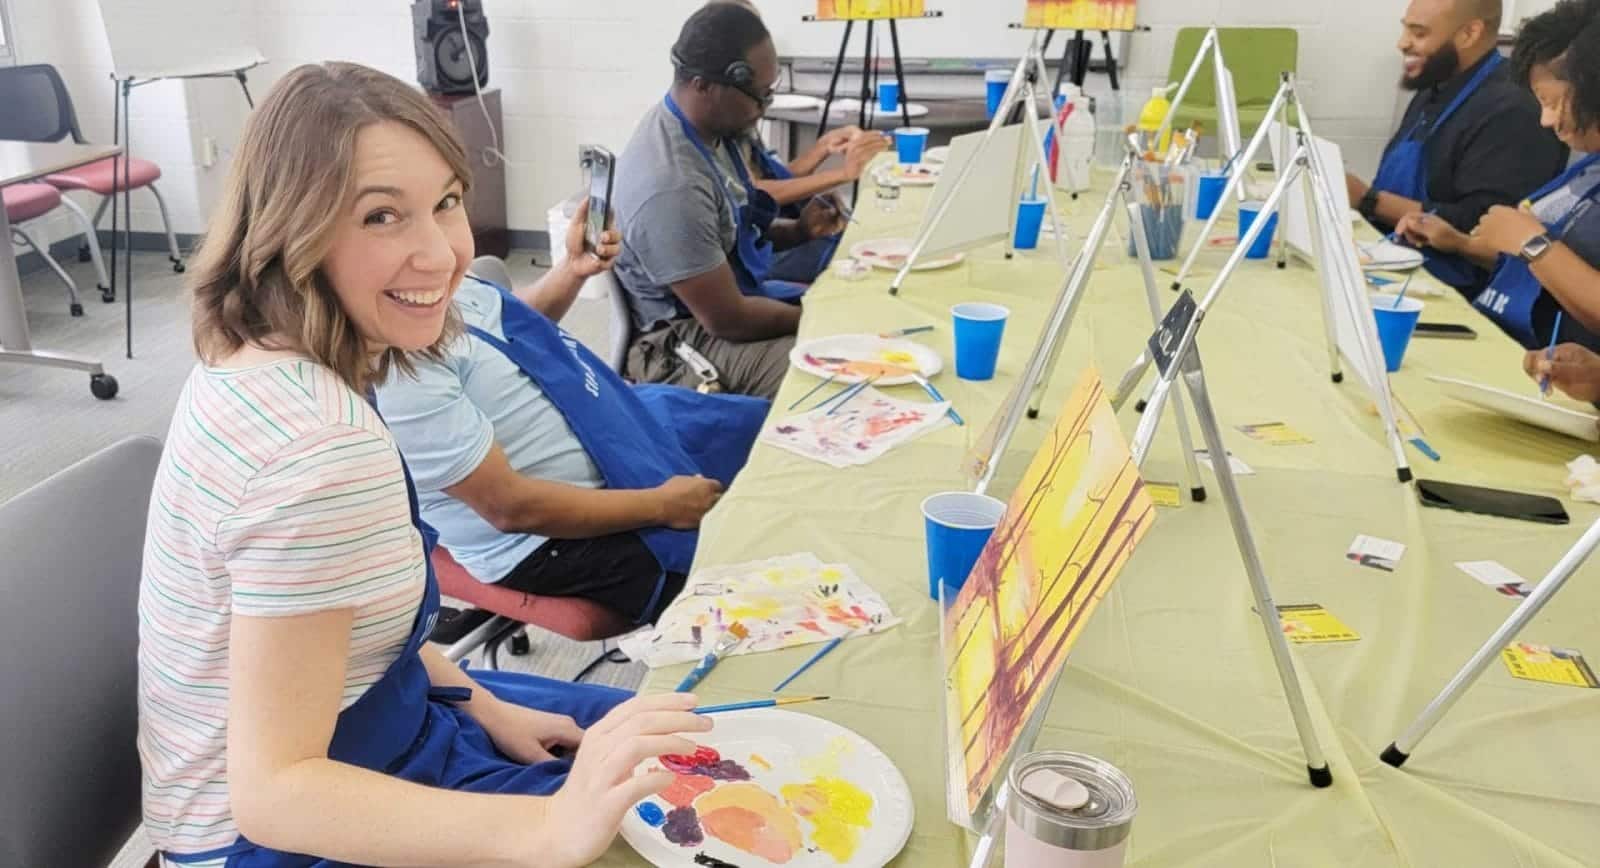 A group of people enjoying a paint and sip session at a table.